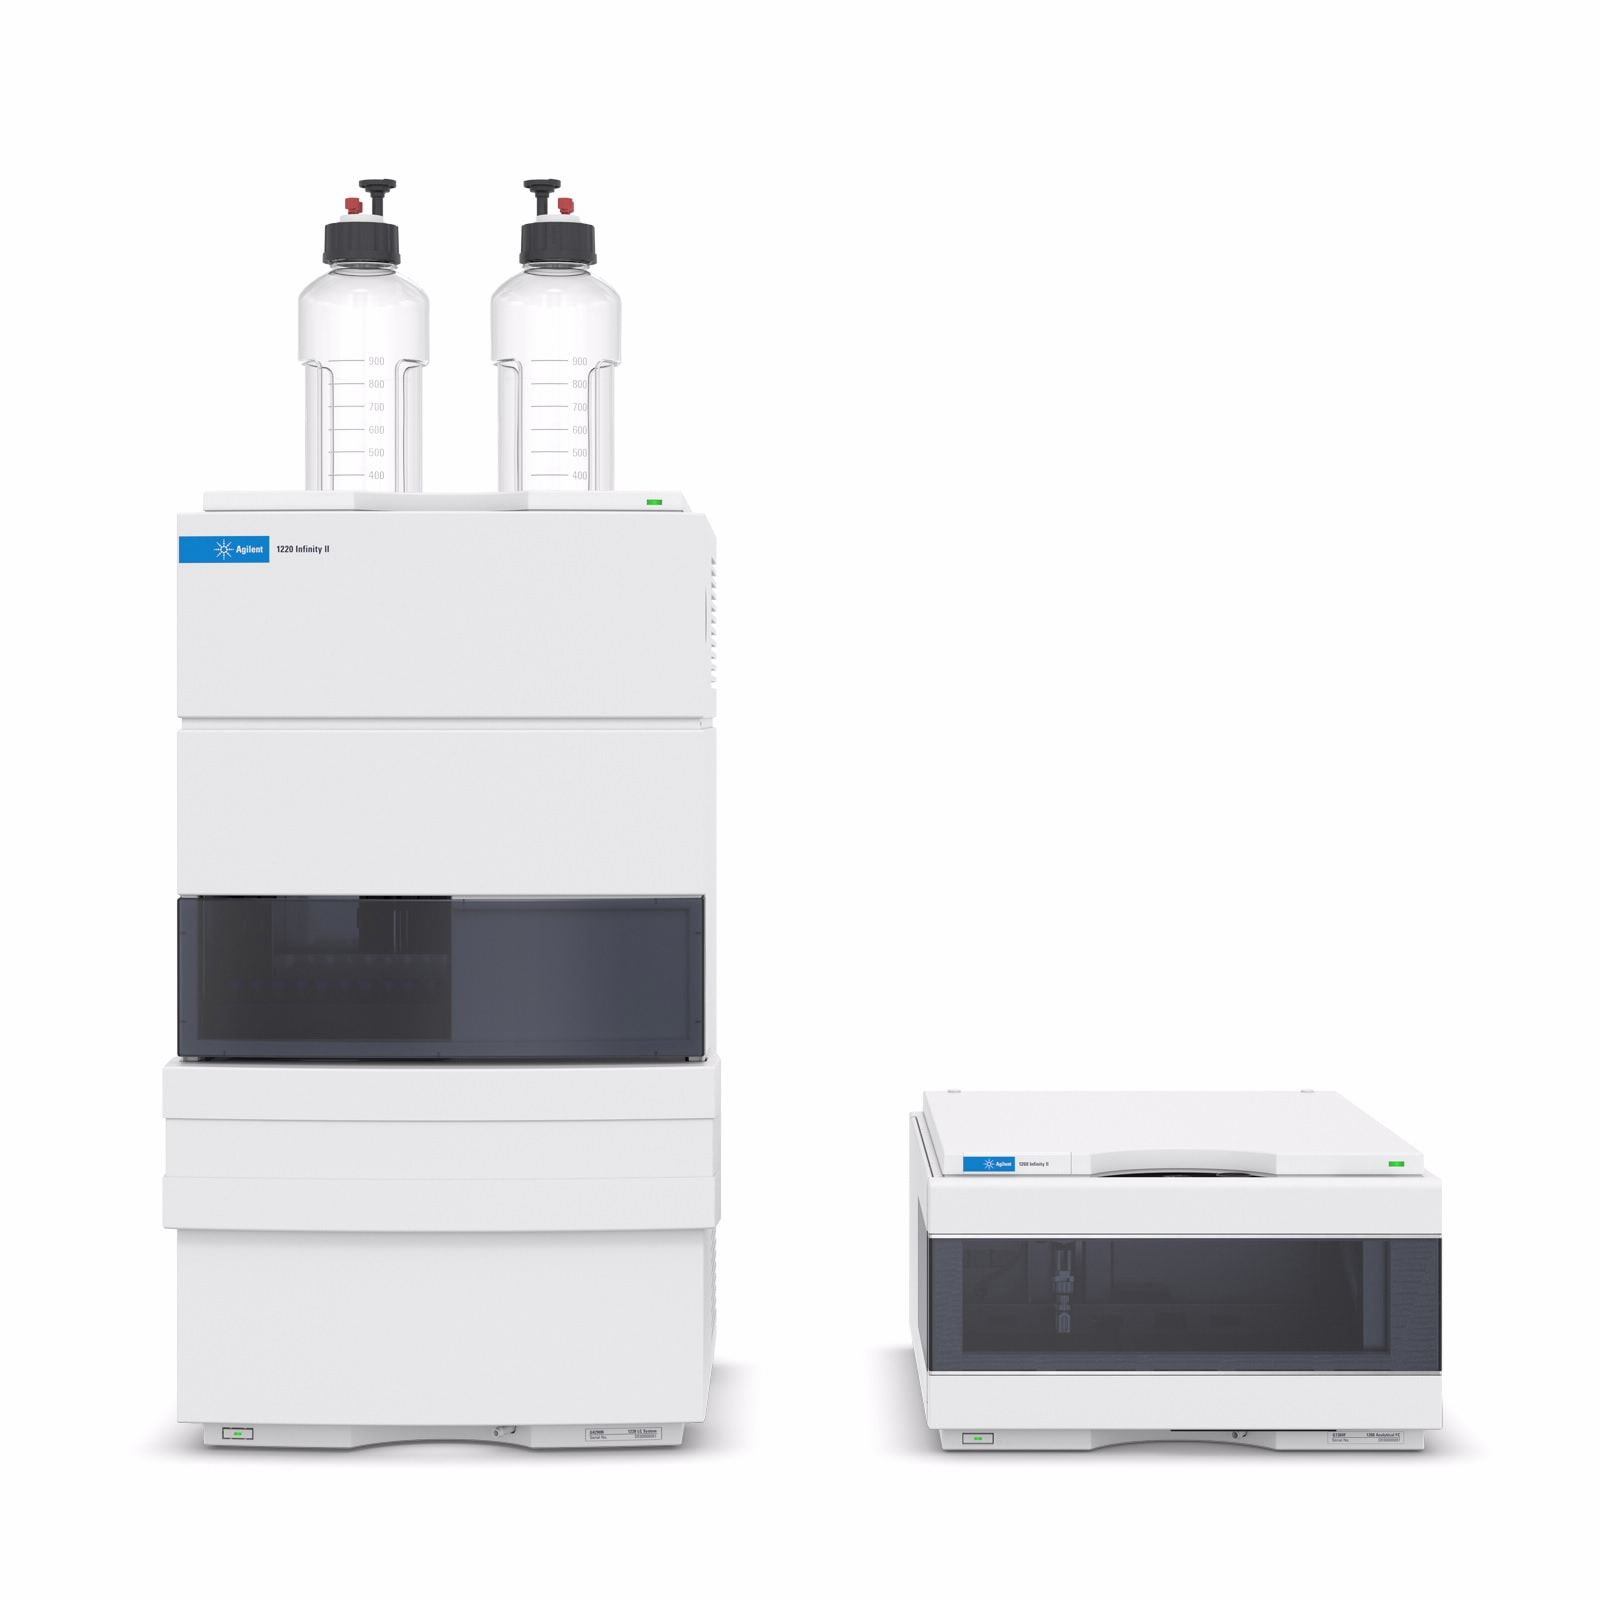 Agilent 1220 Infinity II Analytical-Scale LC Purification System